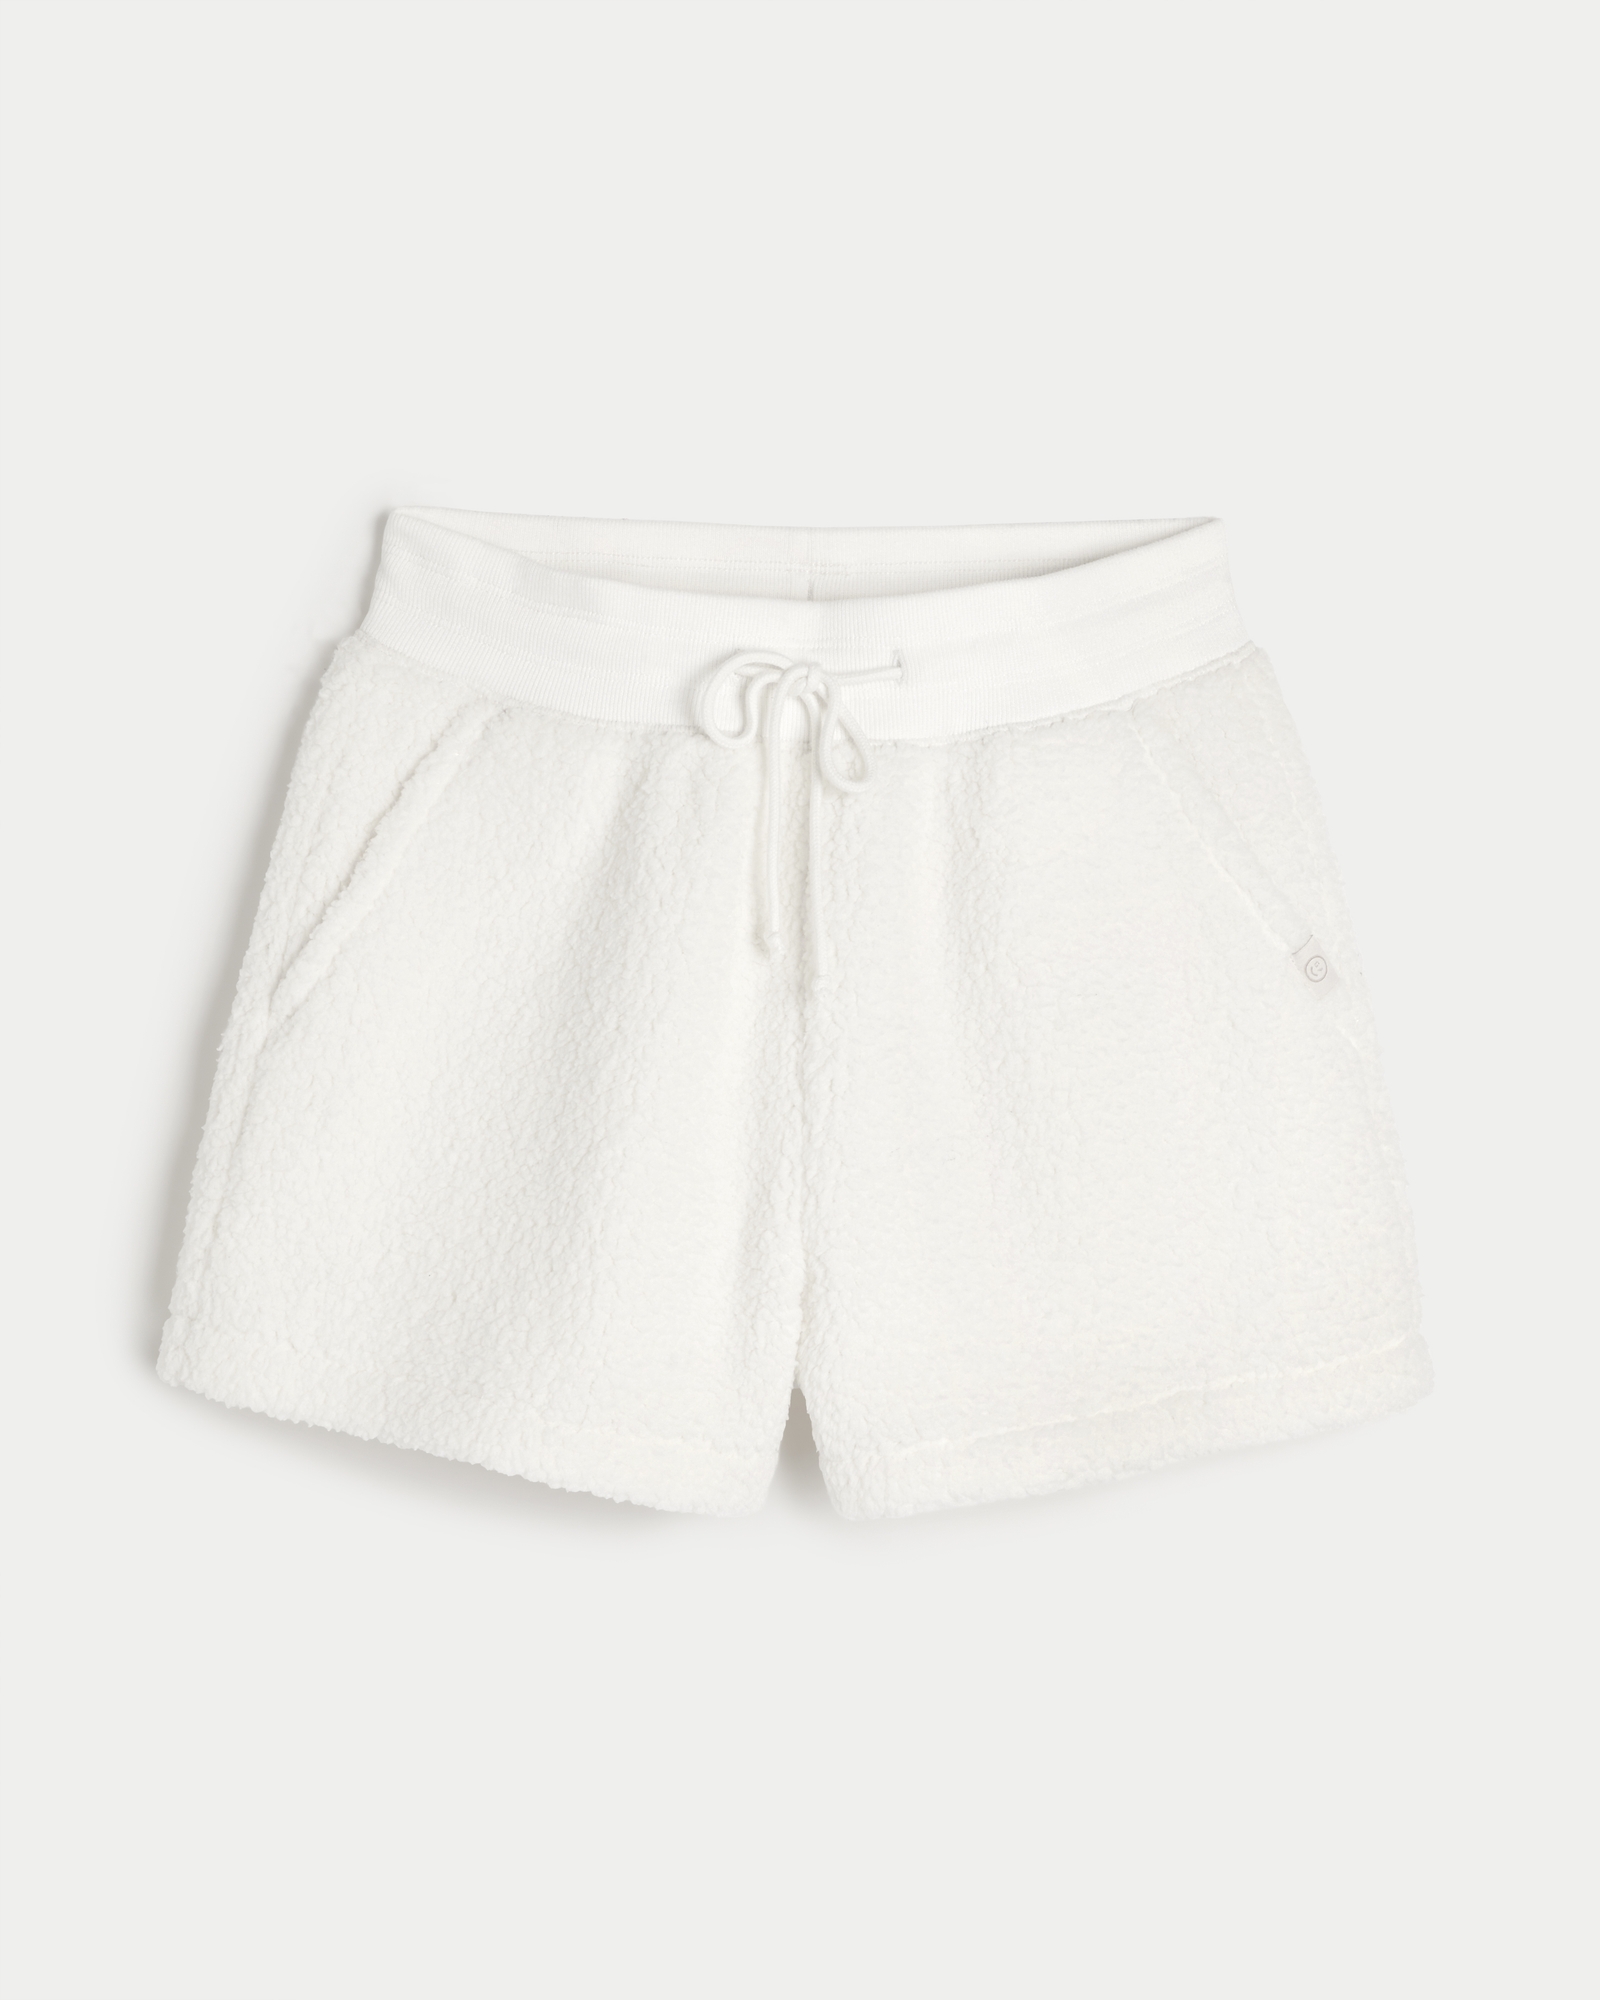 Women's Gilly Hicks Cozy Waffle Shorts, Women's Clearance